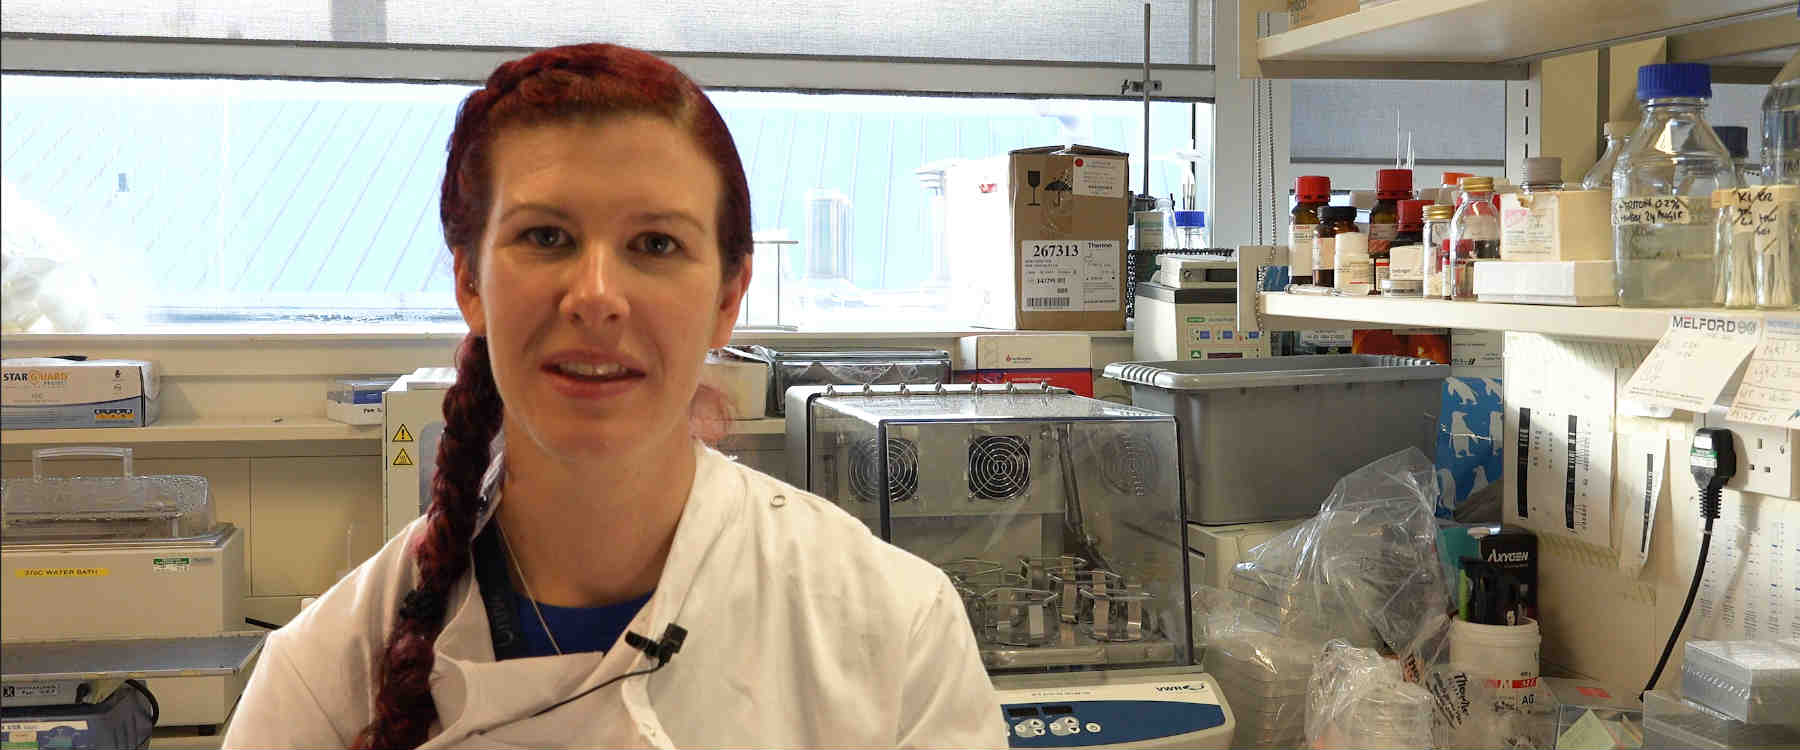 Dr Kirsty Robb in the lab at University of Strathclyde